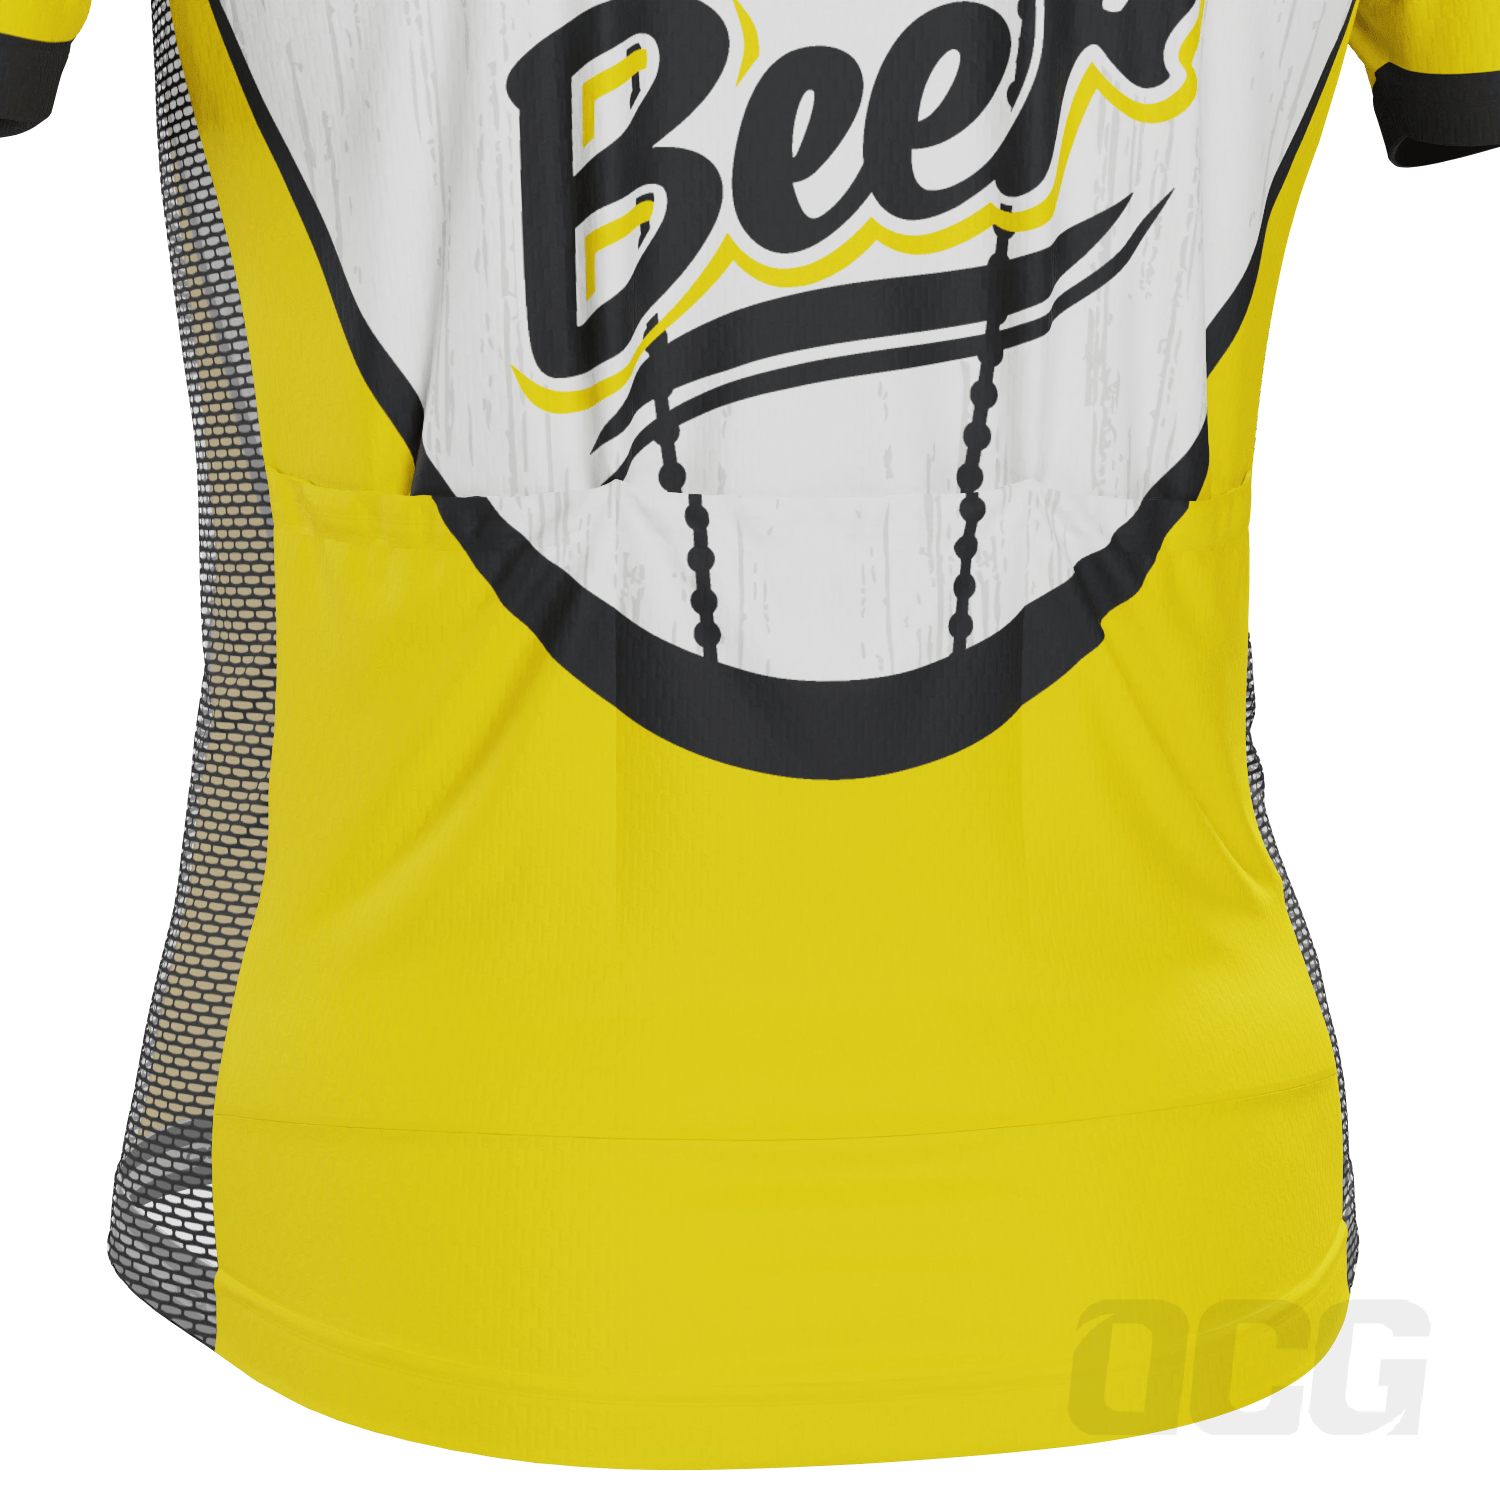 Men's Powered By Beer Short Sleeve Cycling Jersey